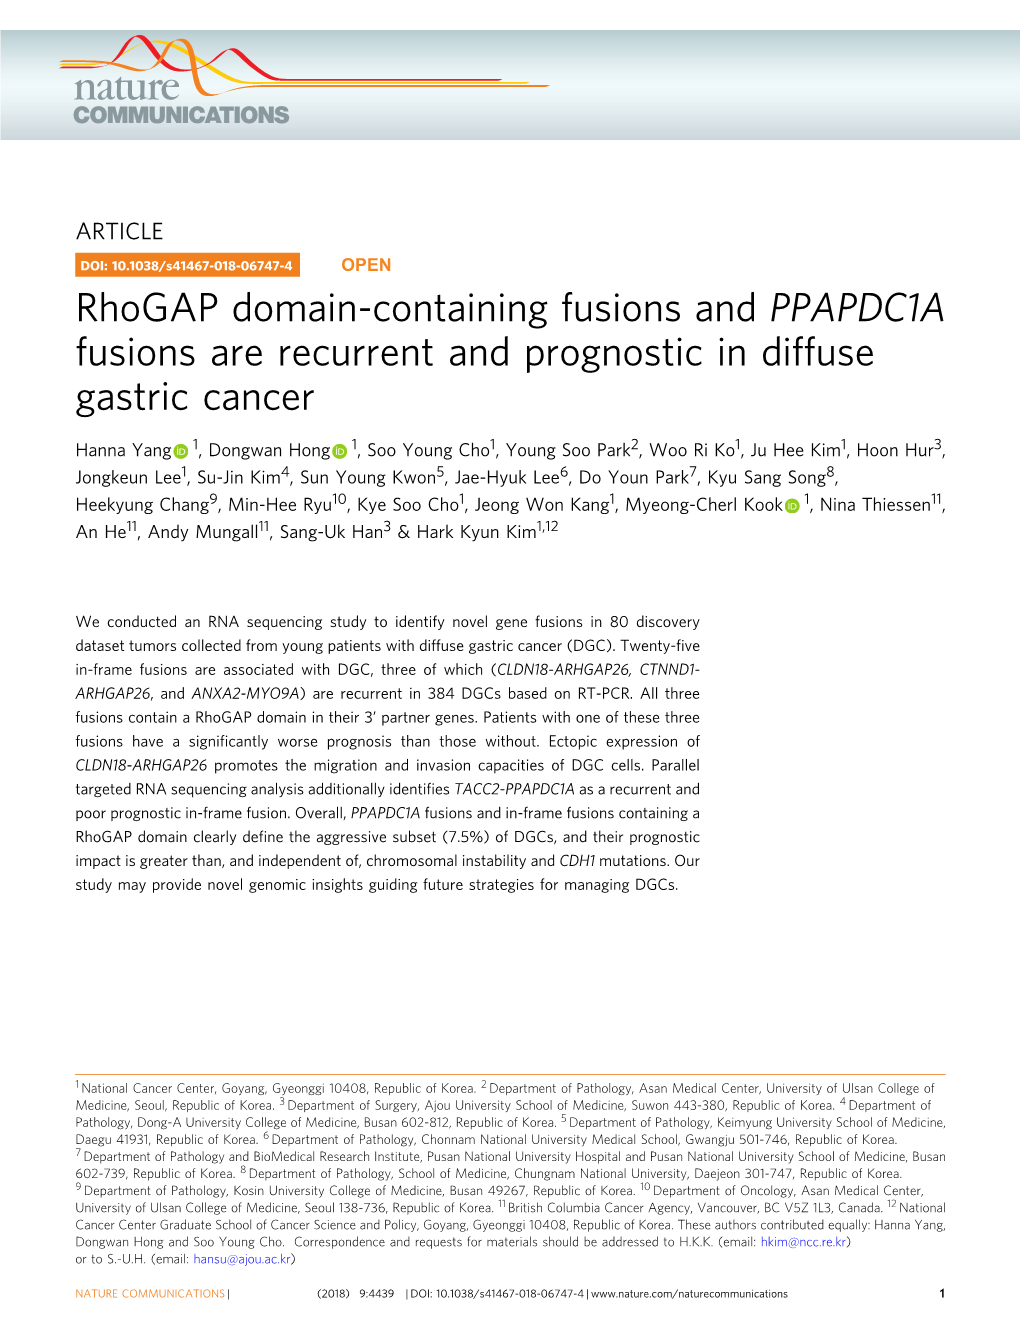 Rhogap Domain-Containing Fusions and PPAPDC1A Fusions Are Recurrent and Prognostic in Diffuse Gastric Cancer